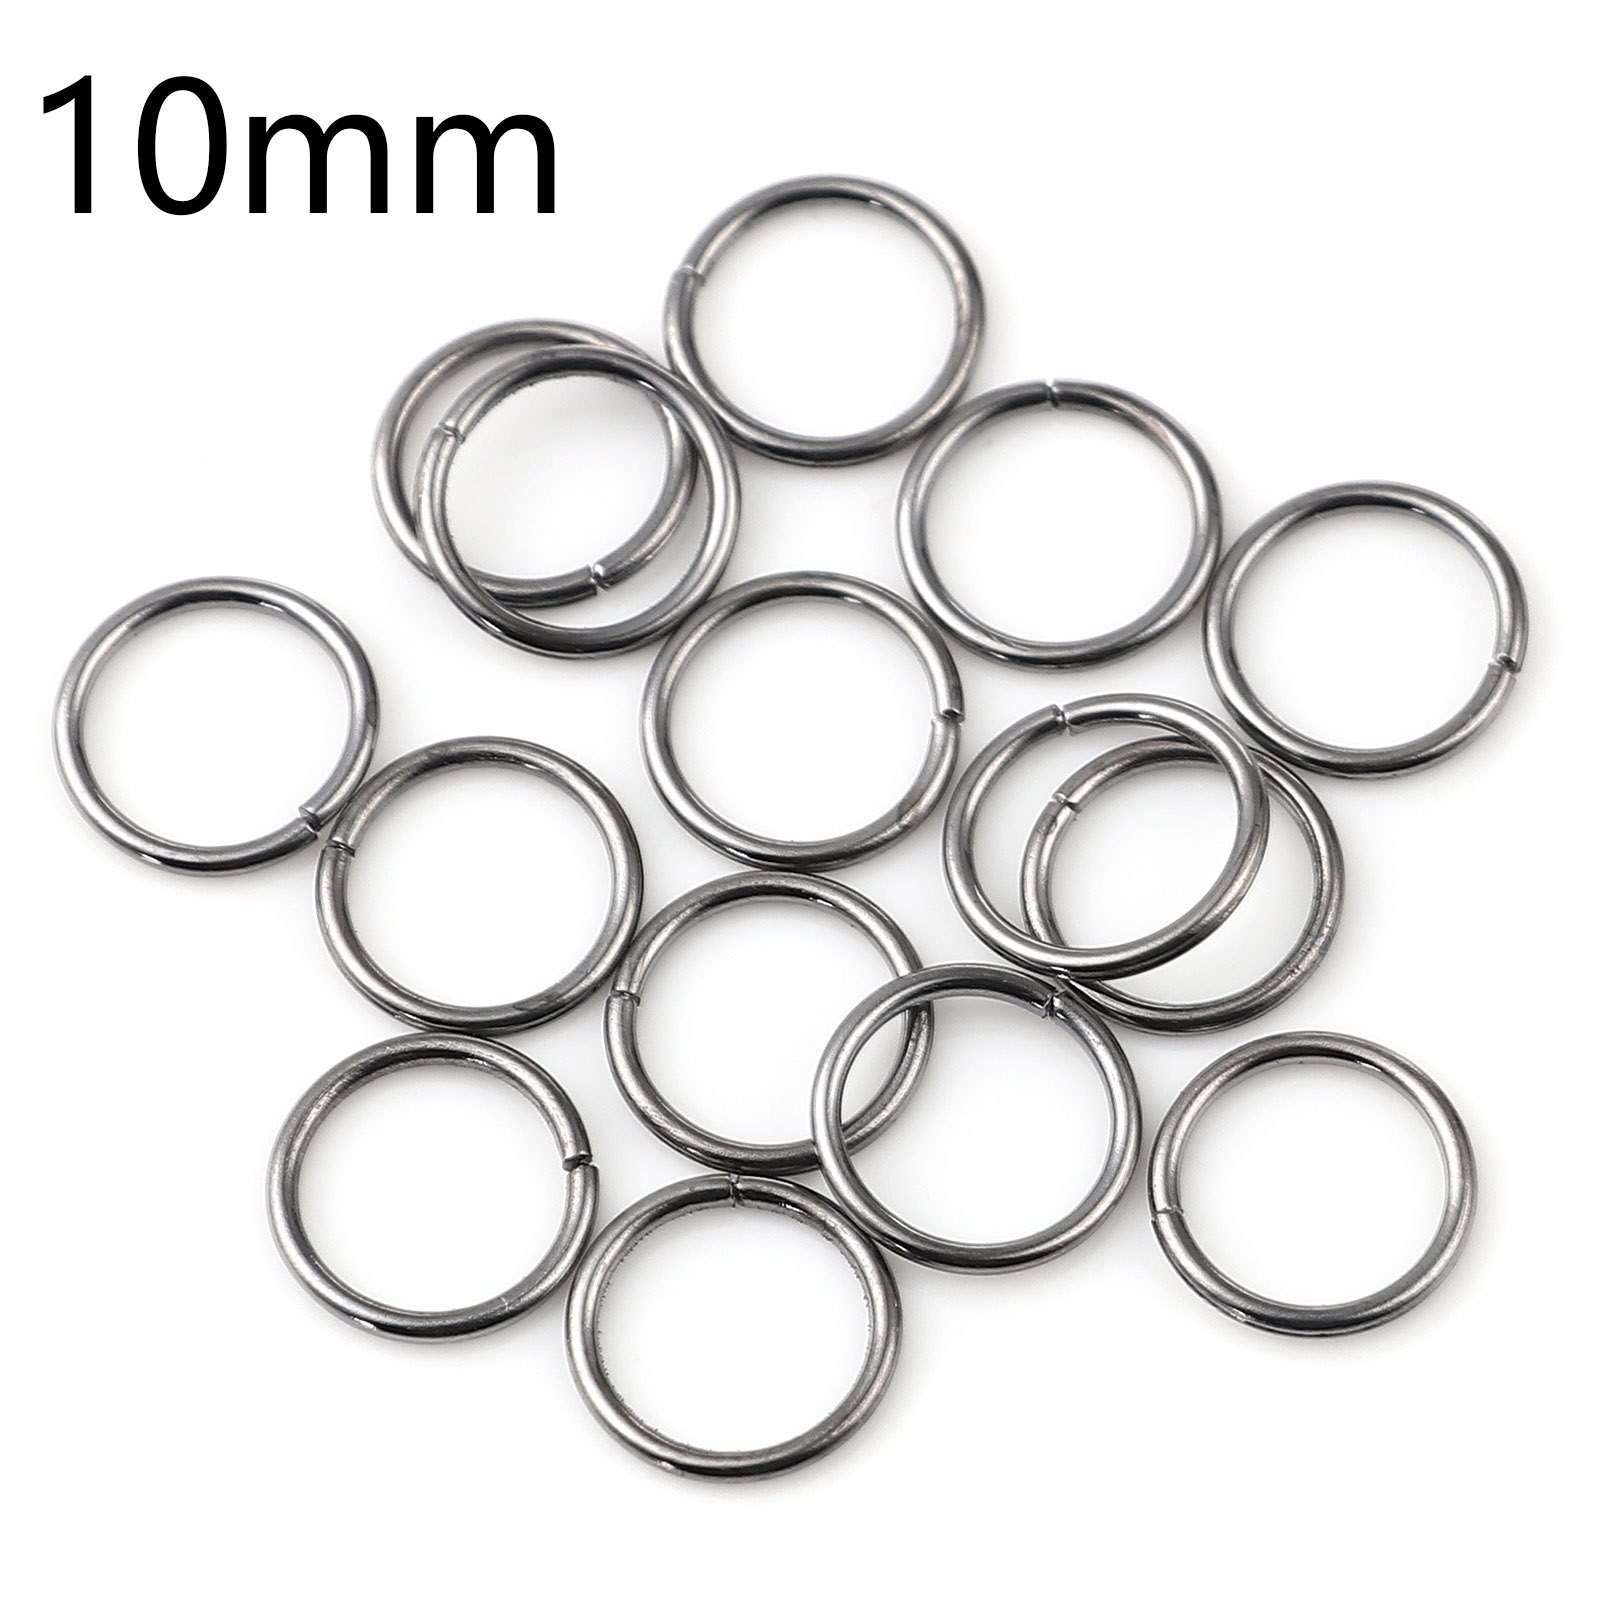 Picture of 1mm Iron Based Alloy Open Jump Rings Findings Circle Ring Gunmetal 10mm Dia, 200 PCs